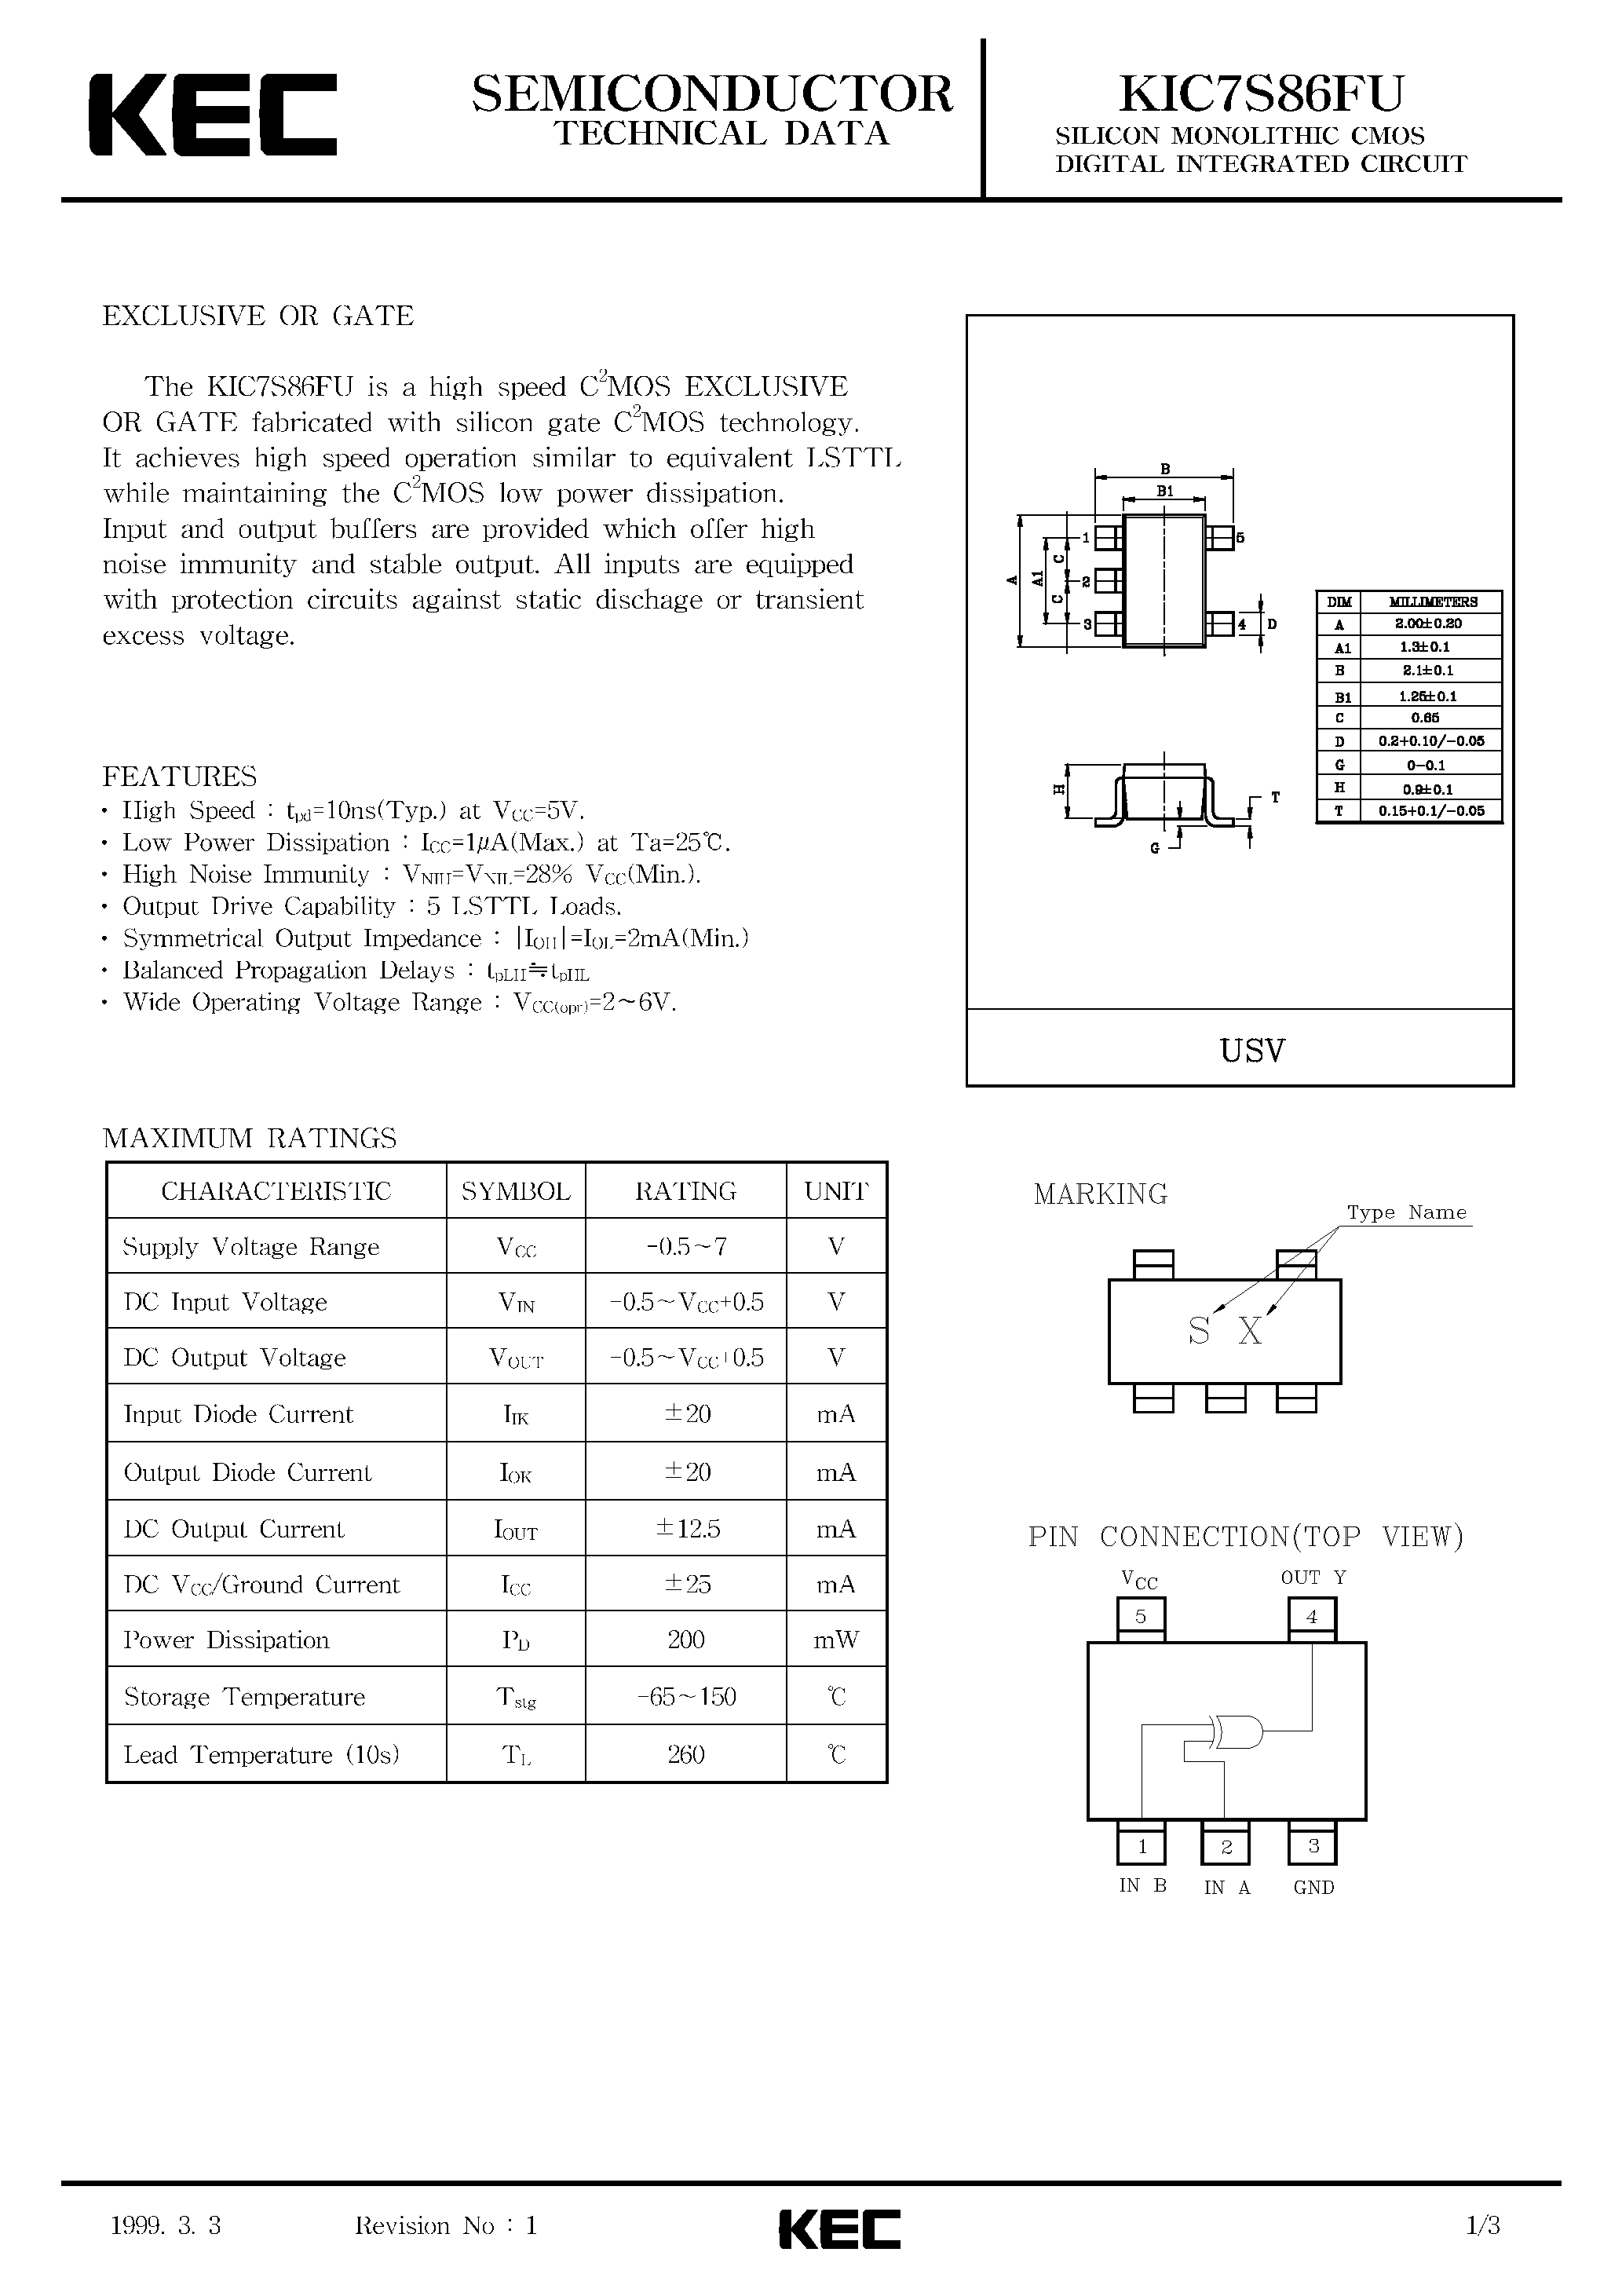 Datasheet KIC7S86 - SILICON MONOLITHIC CMOS DIGITAL INTEGRATED CIRCUIT(EXCLUSIVE OR GATE) page 1